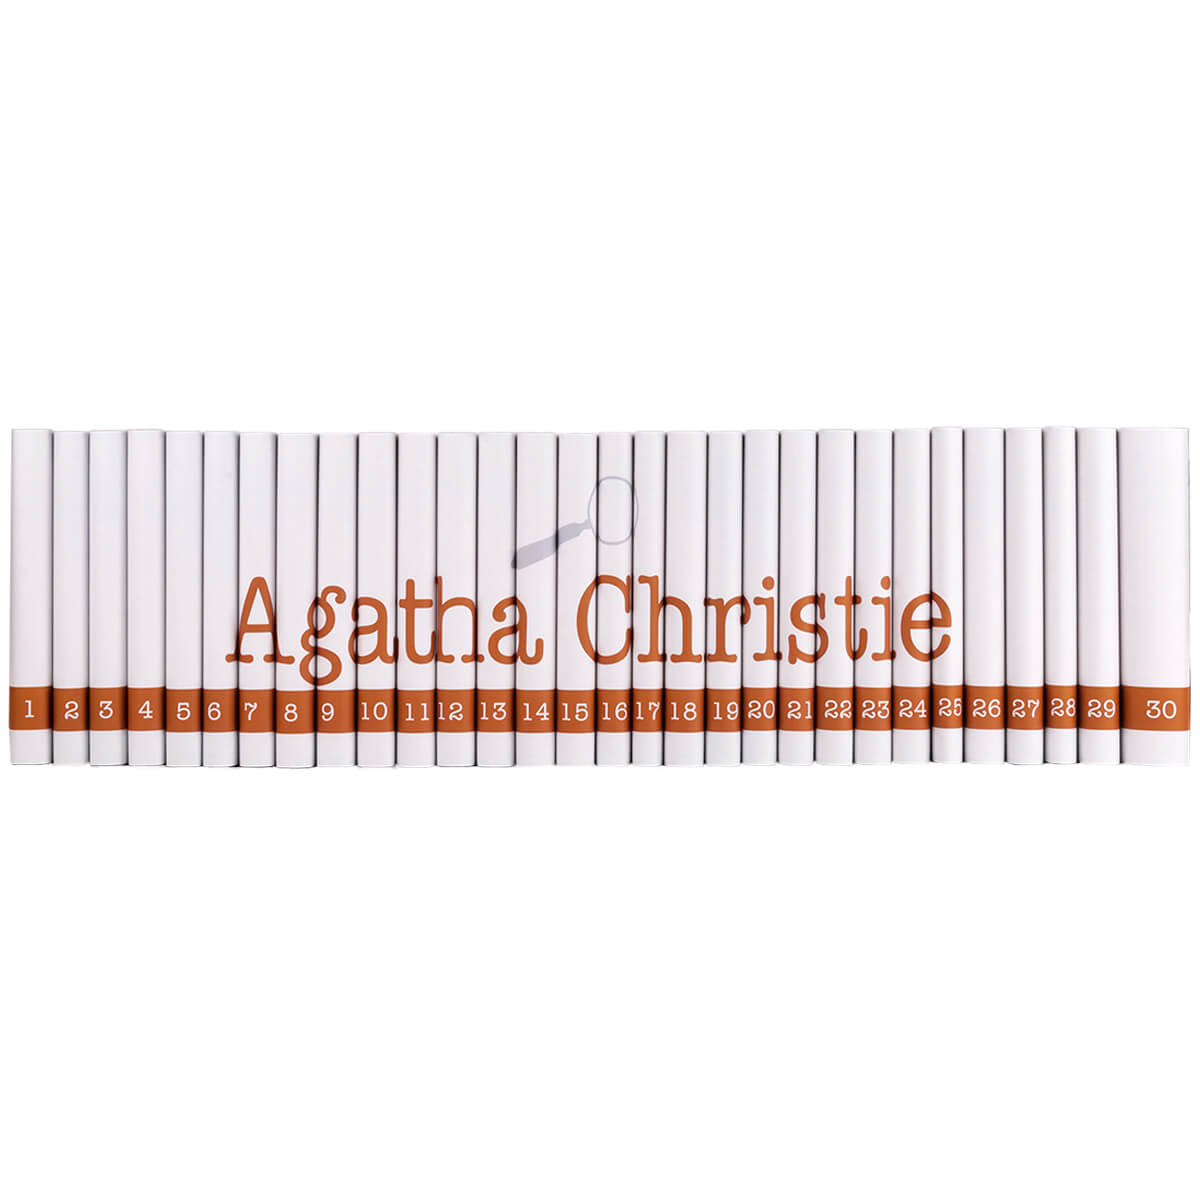 Dame Agatha Mary Clarissa Christie, Lady Mallowan, DBE was an English writer known for her 66 detective novels and 14 short story collections. Her fictional detectives Hercule Poirot and Miss Marple are beloved by readers worldwide.